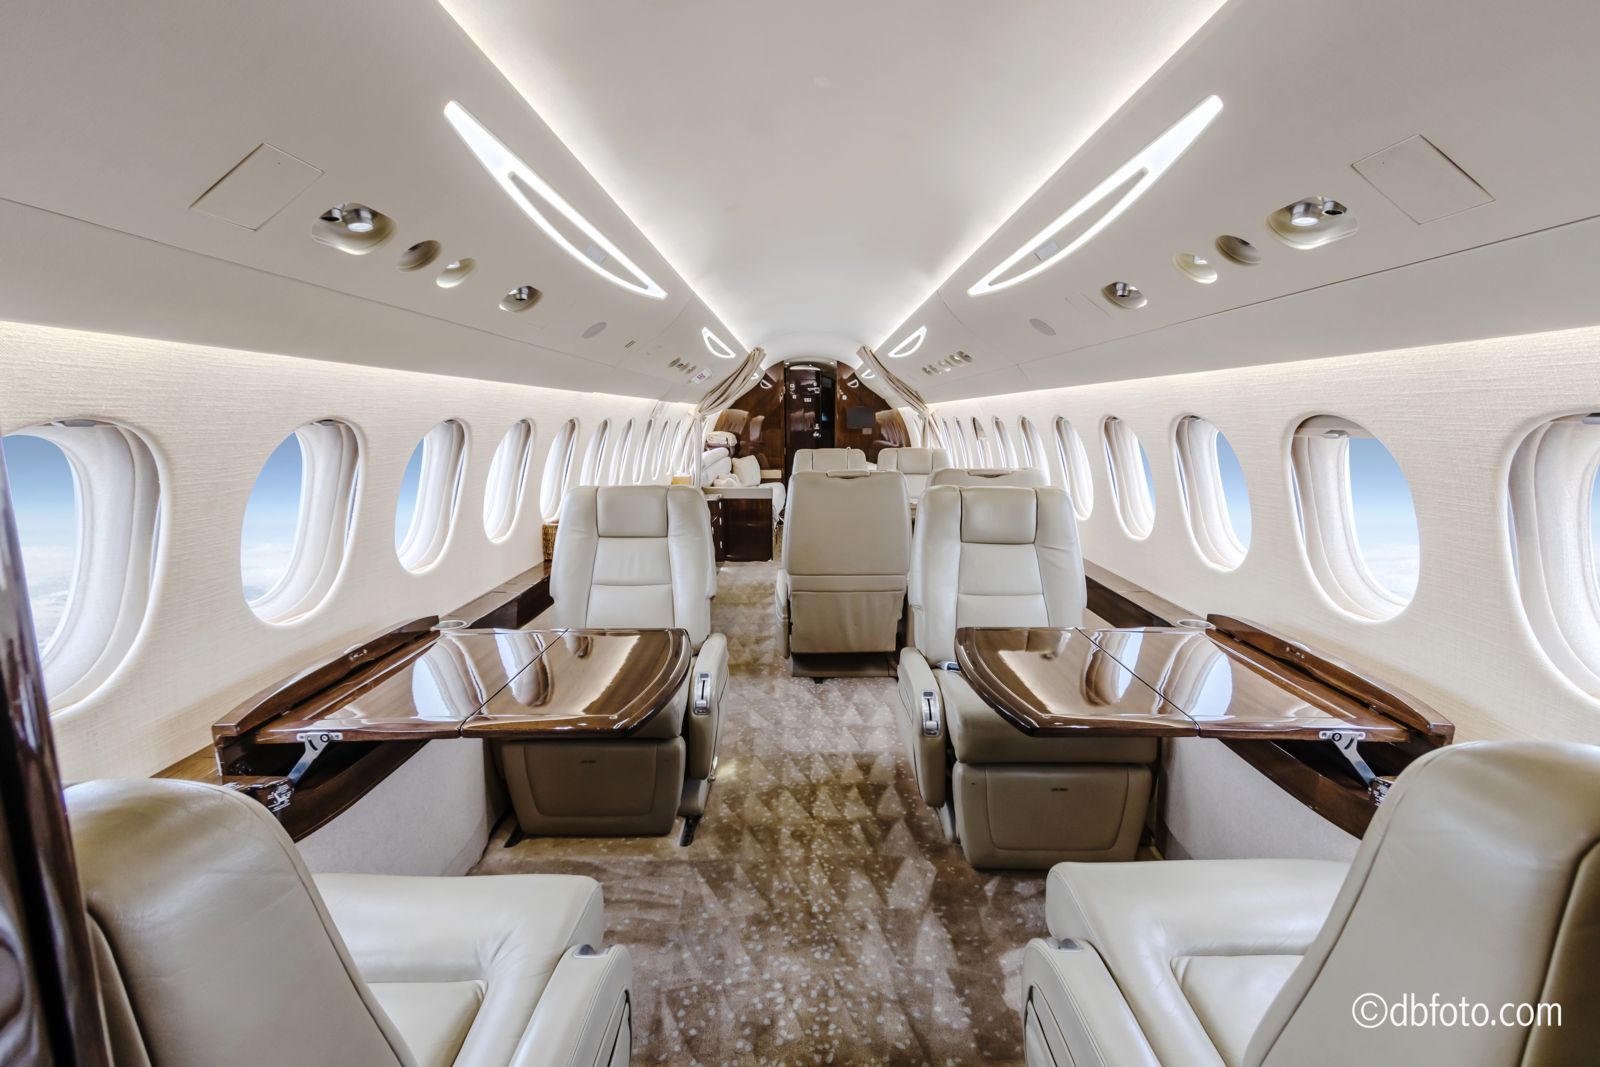 Dassault Falcon 7X  S/N 26 for sale | gallery image: /userfiles/images/F7X_sn26/cabin%20%C2%A9dbfoto10.jpg